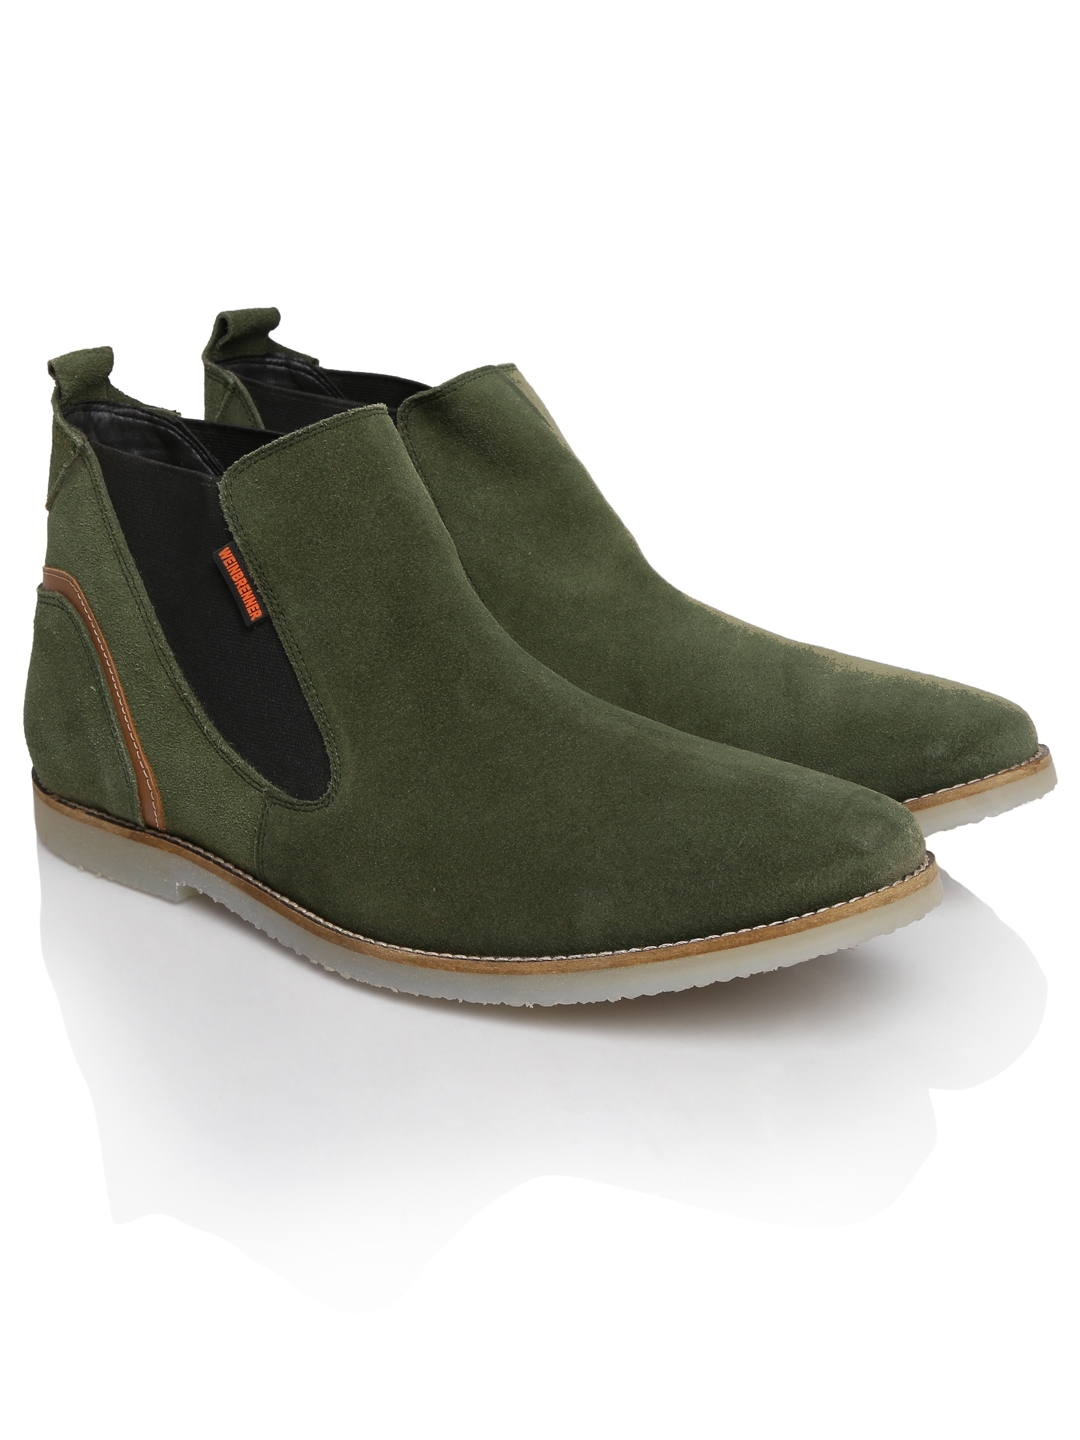 mens army green shoes